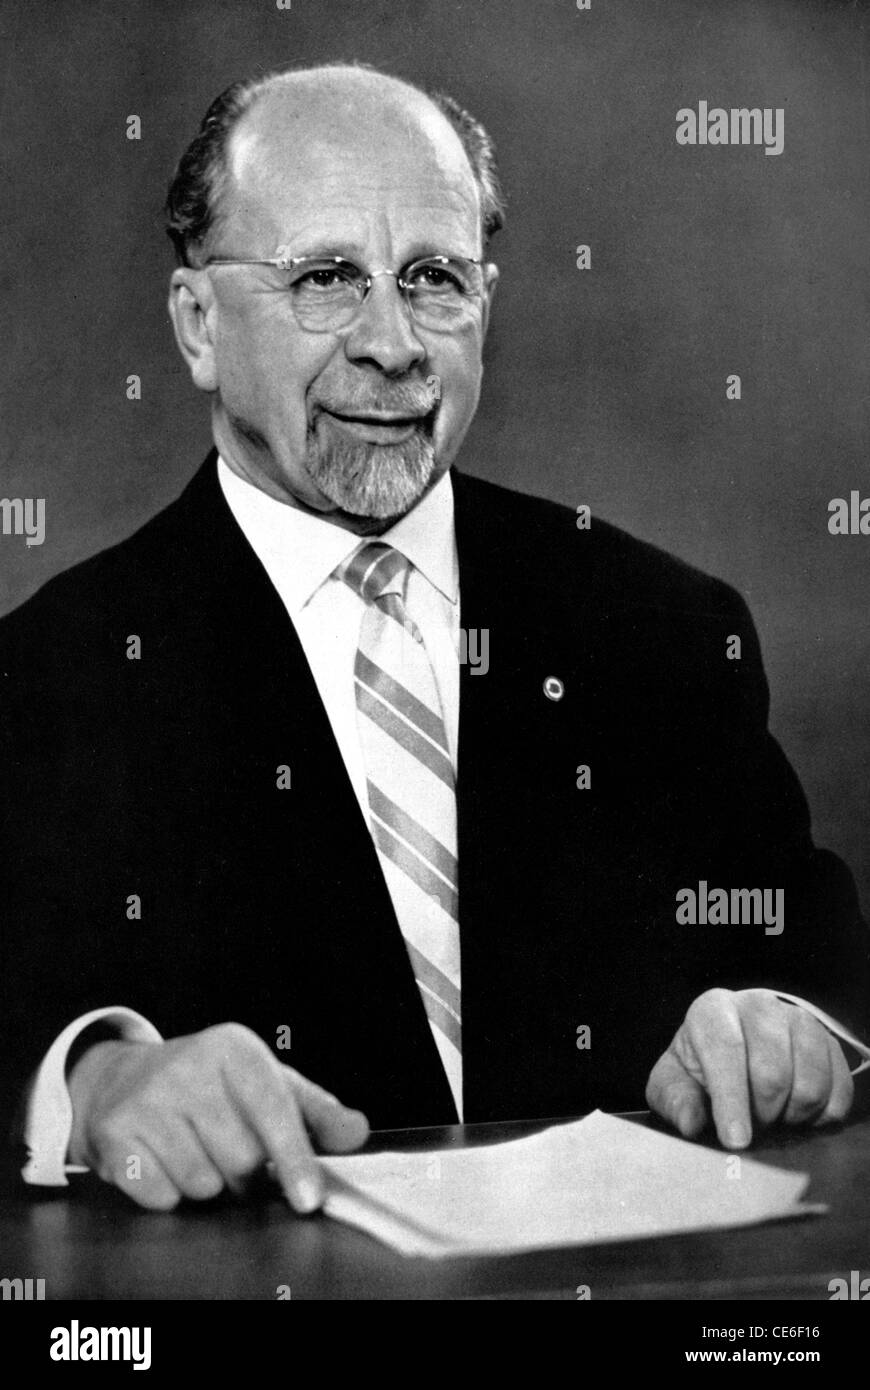 TV address of the Chairman of the Council of state of the GDR Walter Ulbricht on April 6th, 1968 in East Berlin. Stock Photo